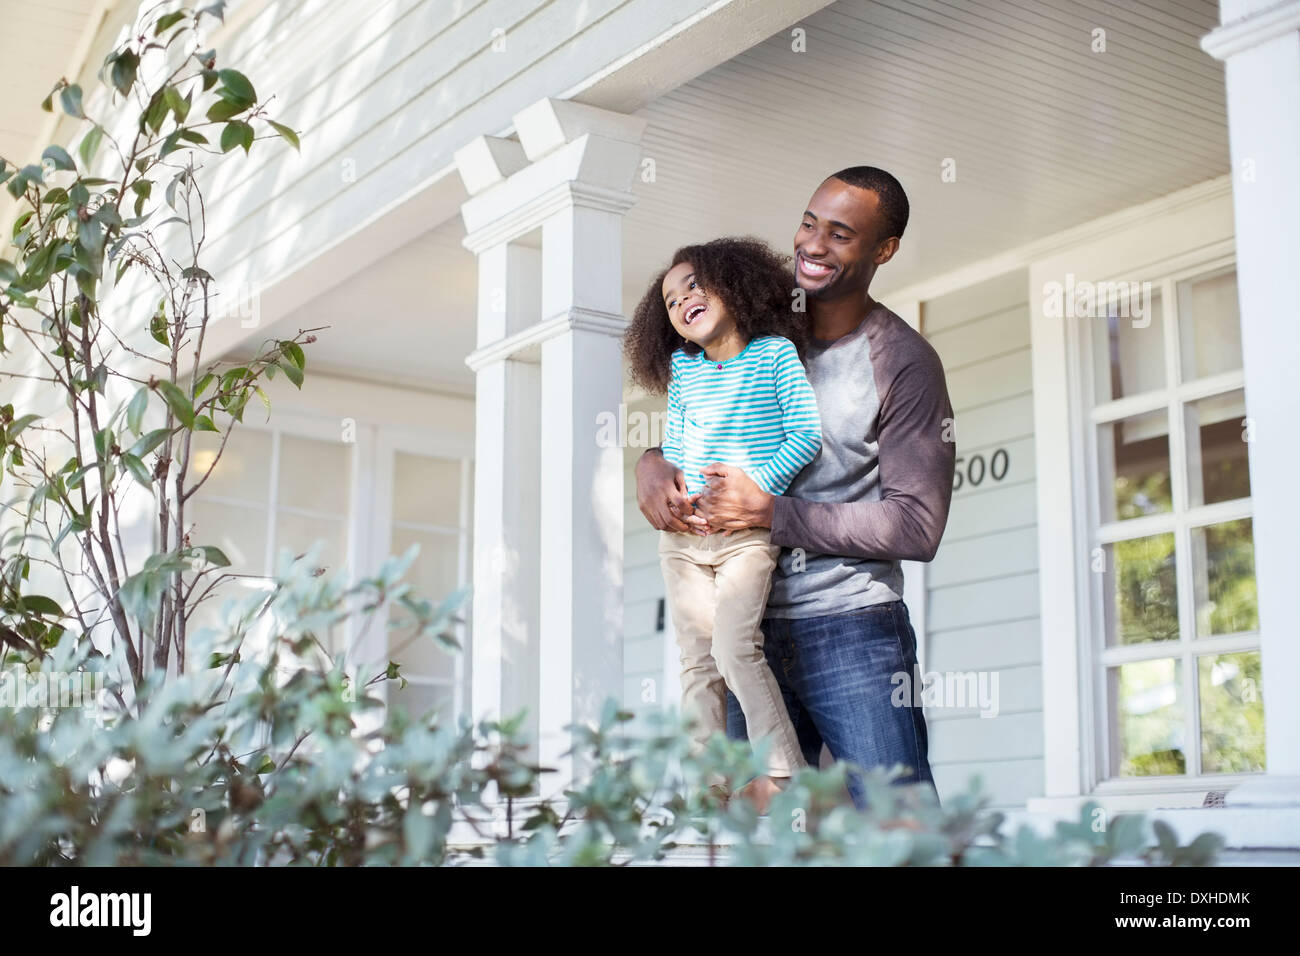 Happy father and daughter on porch Stock Photo